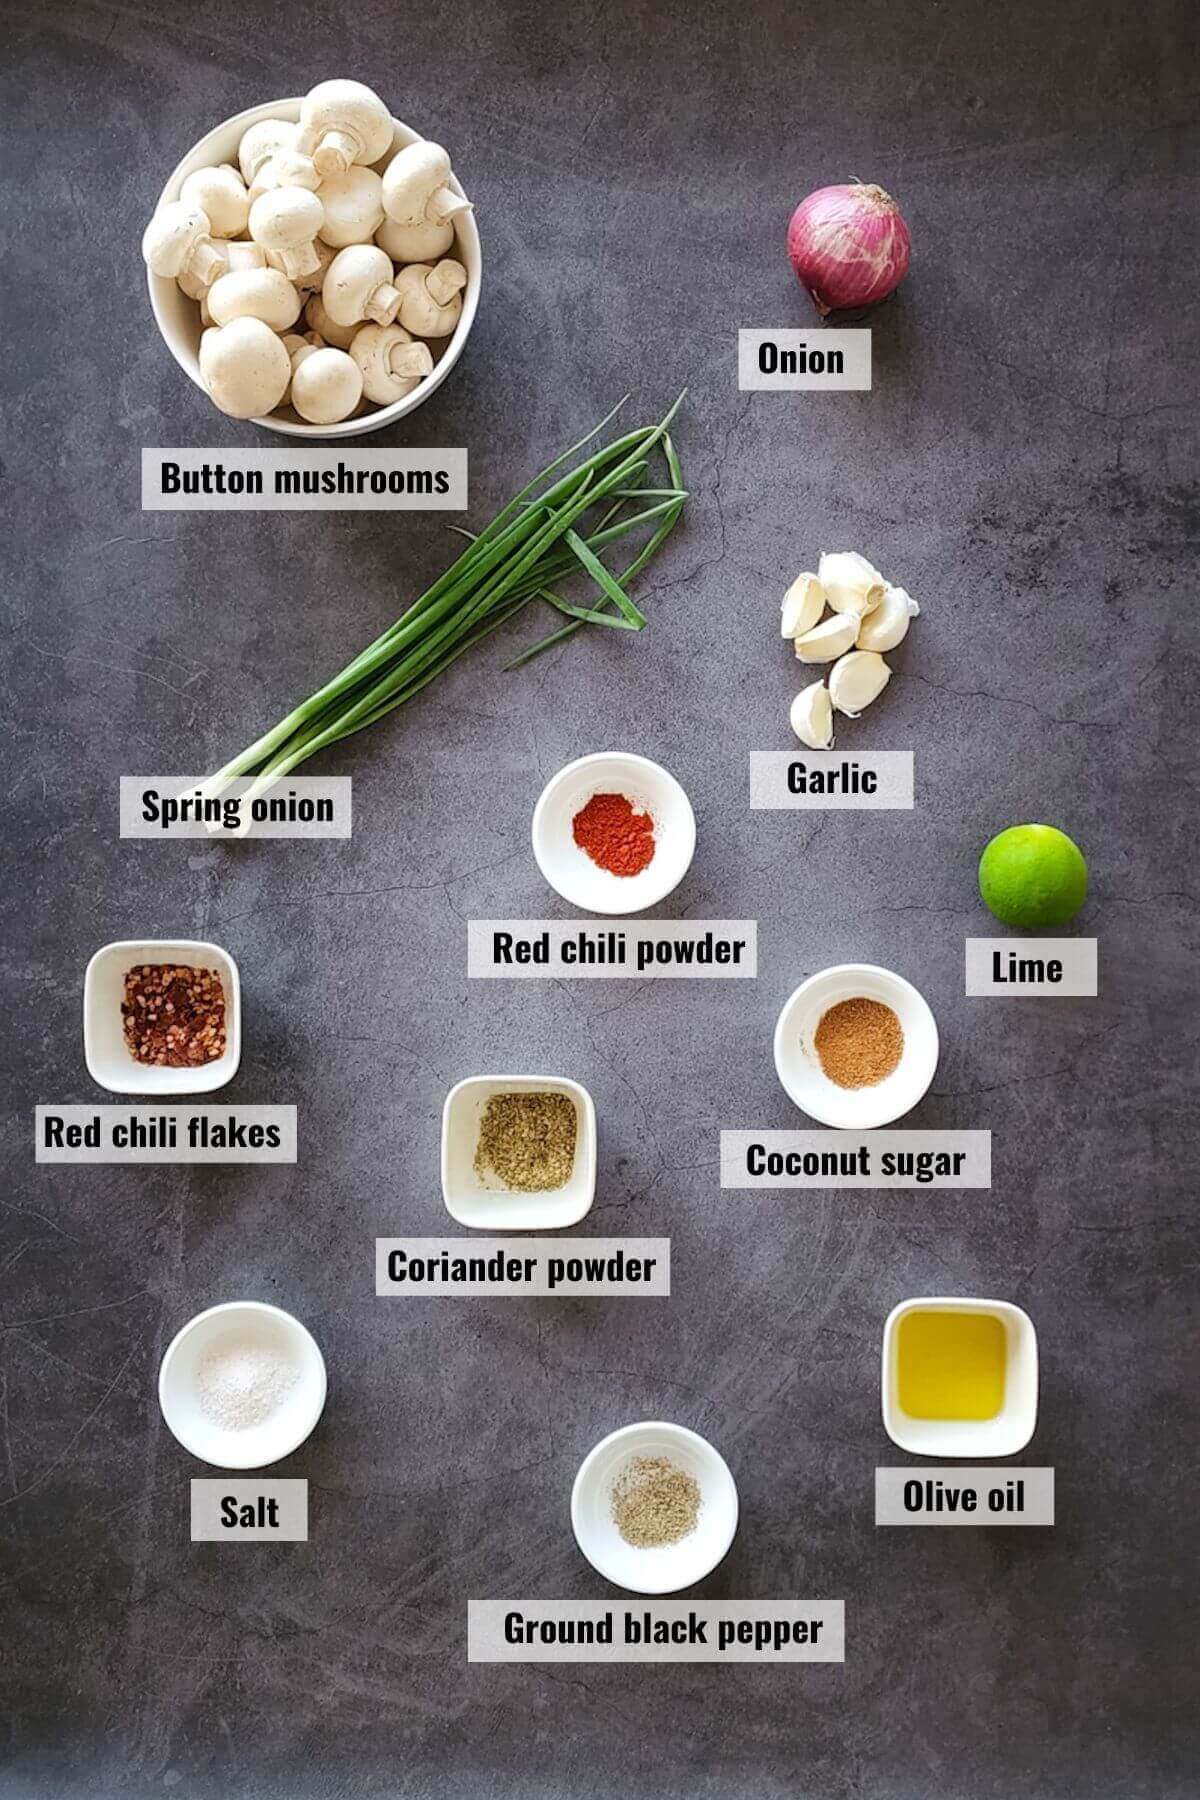 Ingredients required to make spicy garlic mushrooms, labelled.